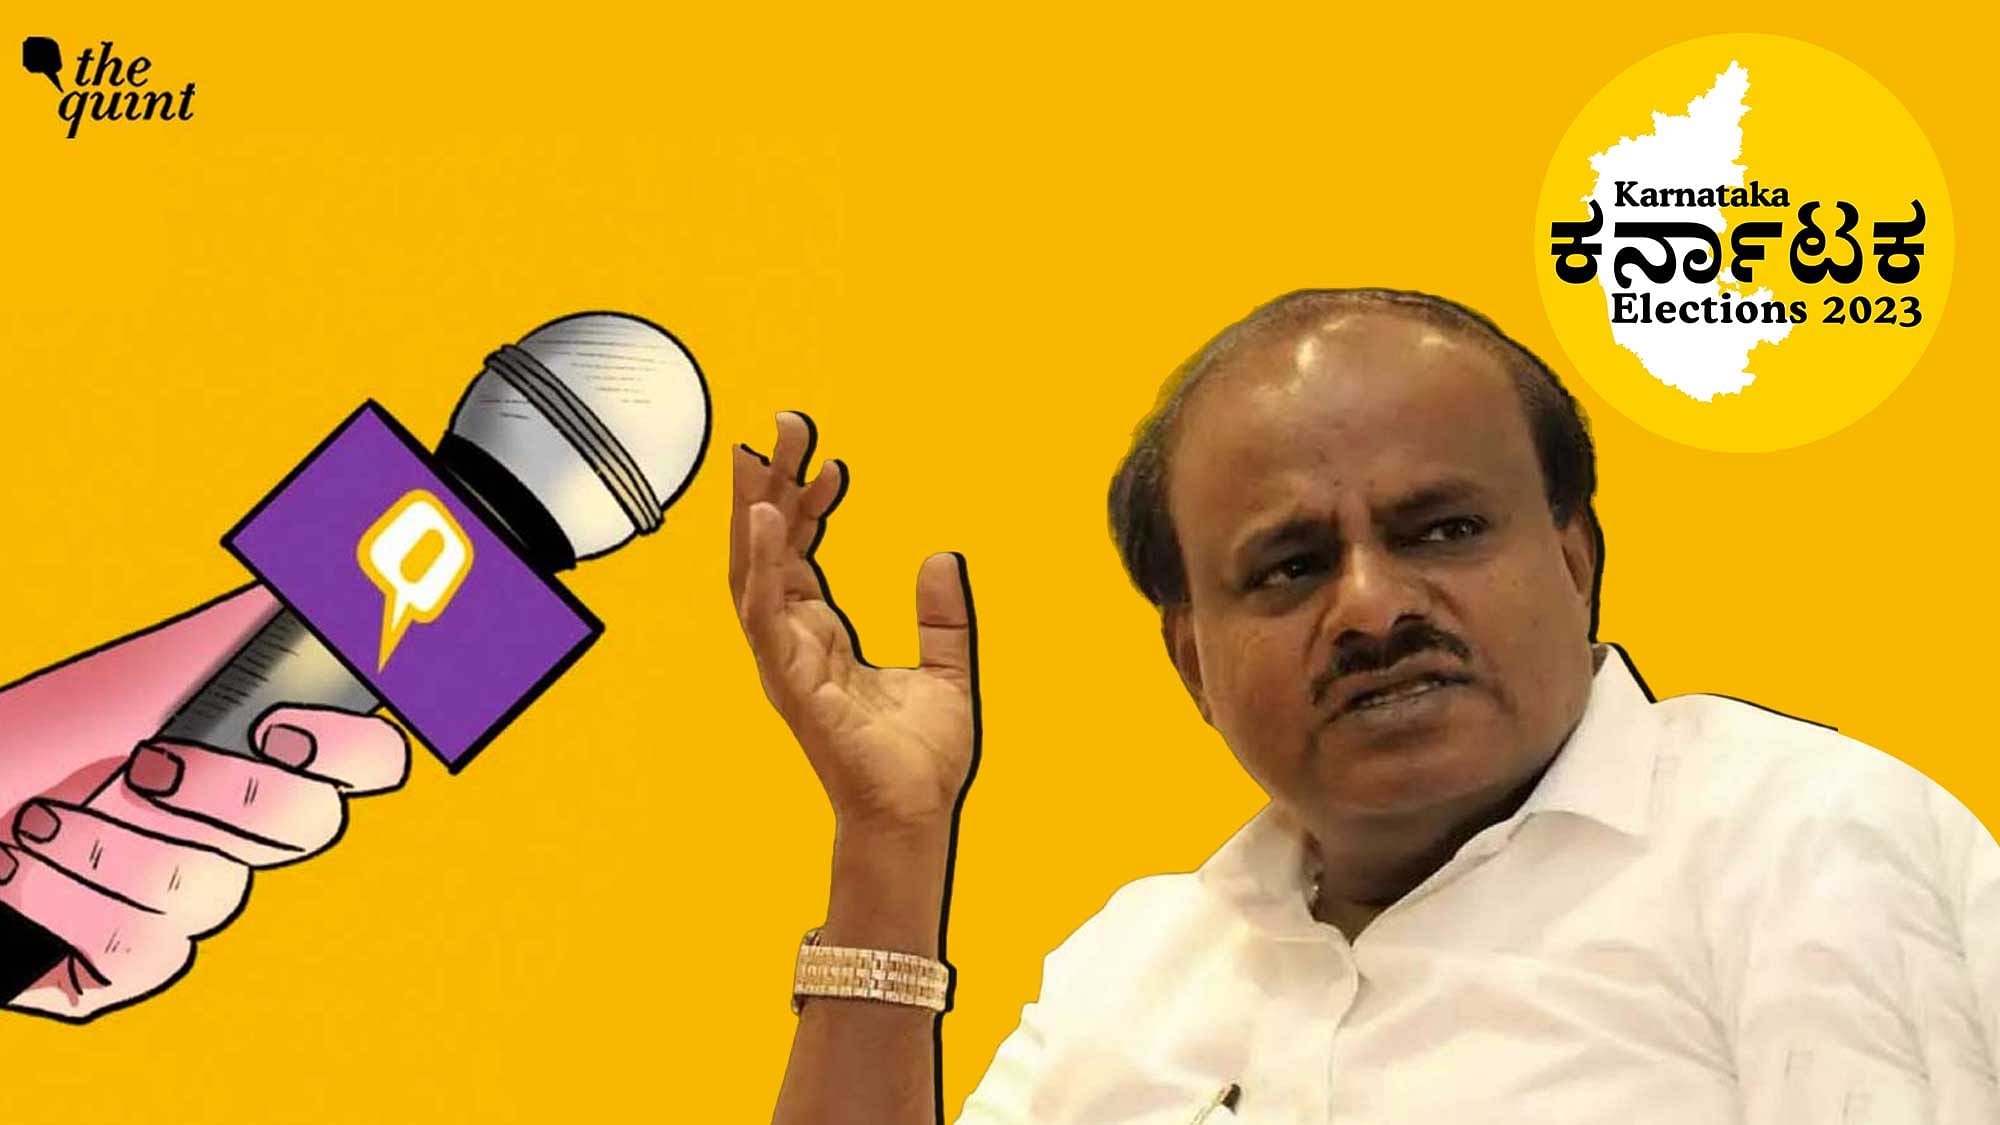 <div class="paragraphs"><p>HD Kumaraswamy of the JD(S) talks to The Quint about his party's plans for Karnataka election 2023.</p></div>